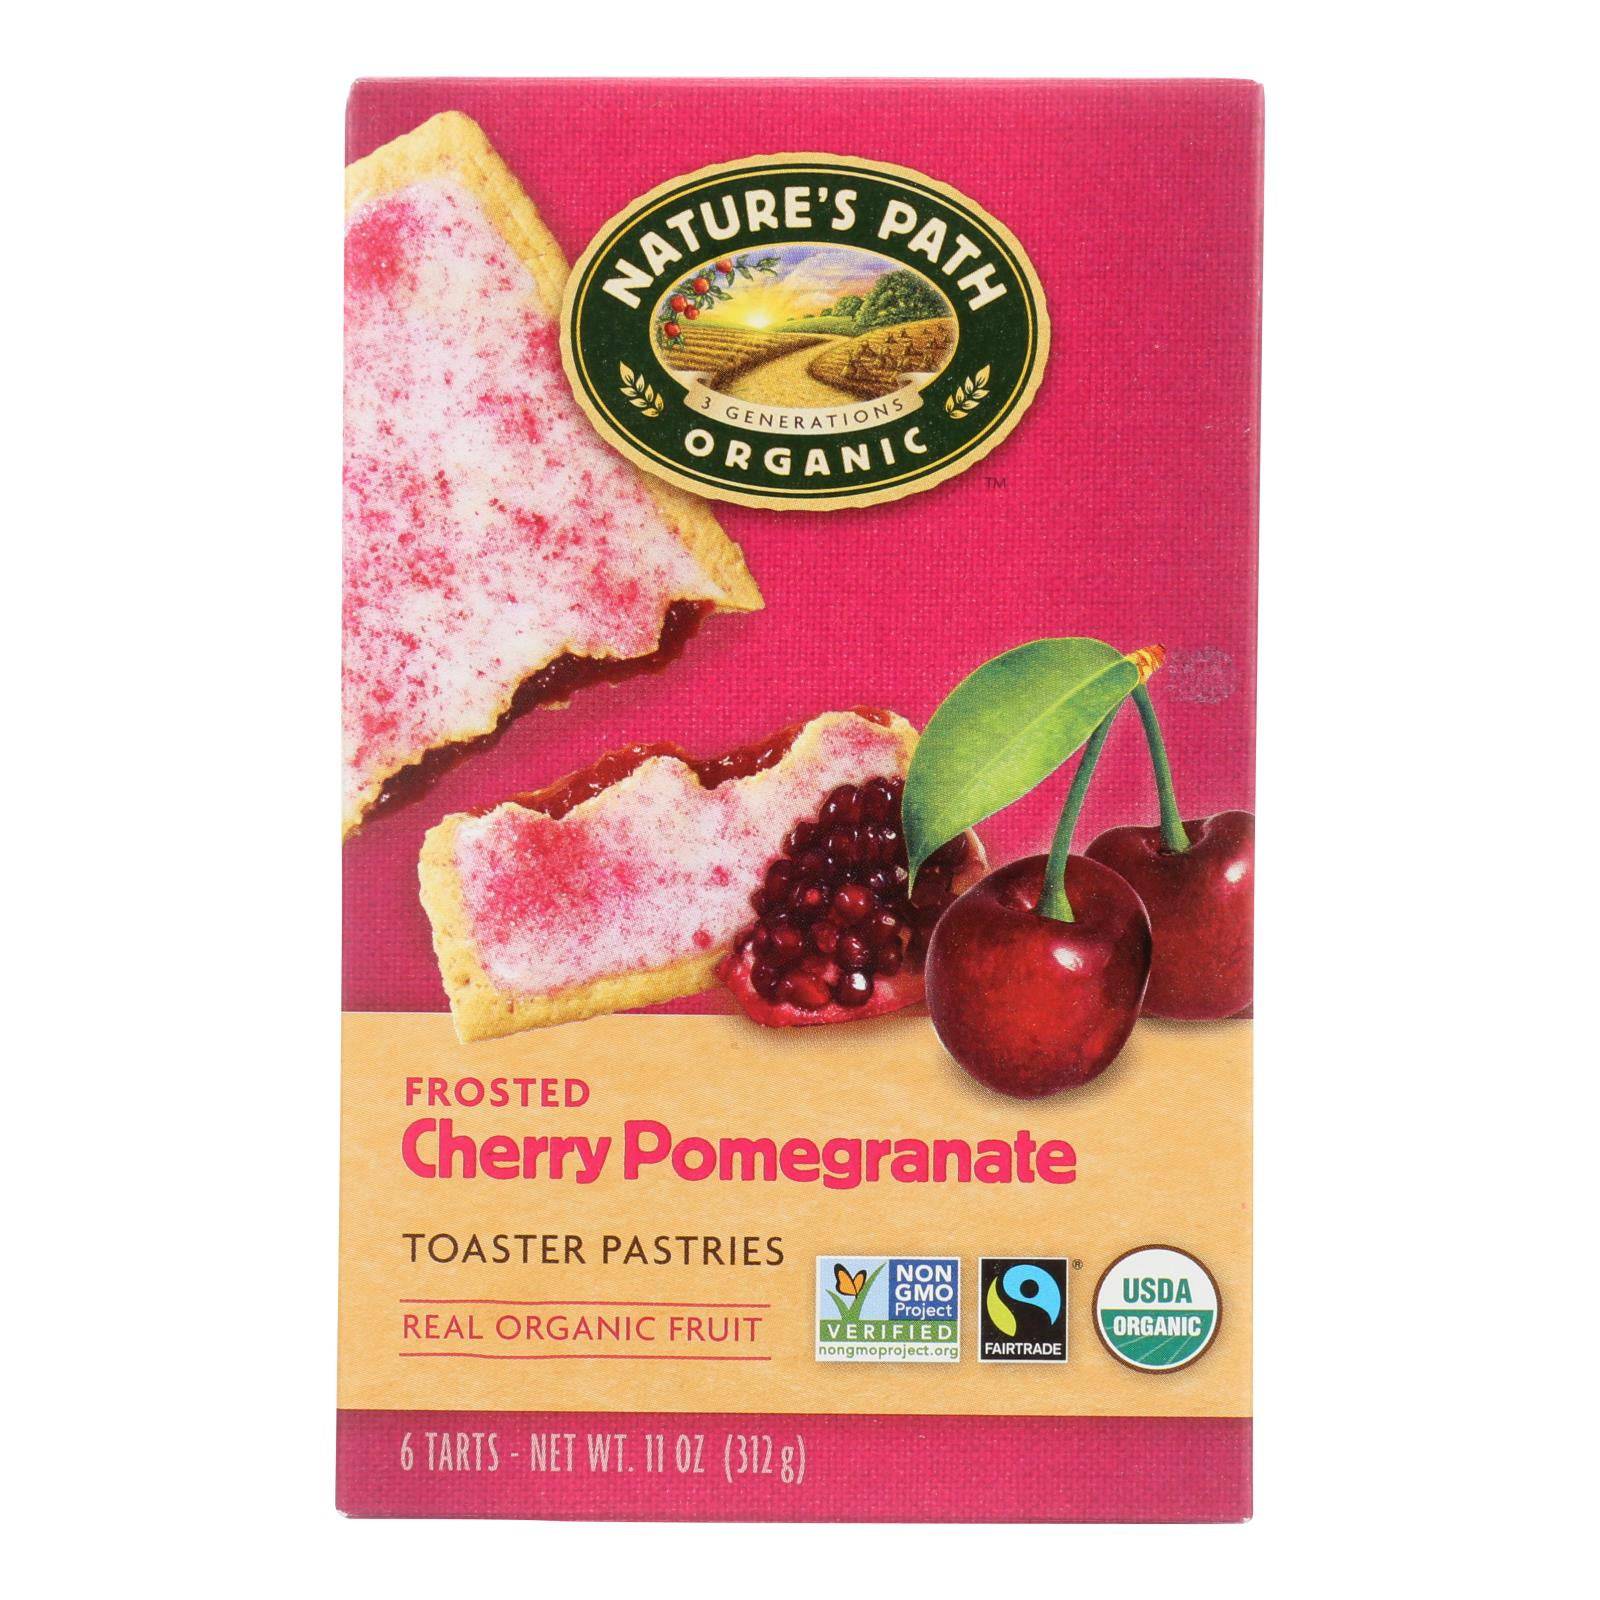 Nature's Path Organic Frosted Toaster Pastries - Cherry Pomegranate - Case Of 12 - 11 Oz. | OnlyNaturals.us